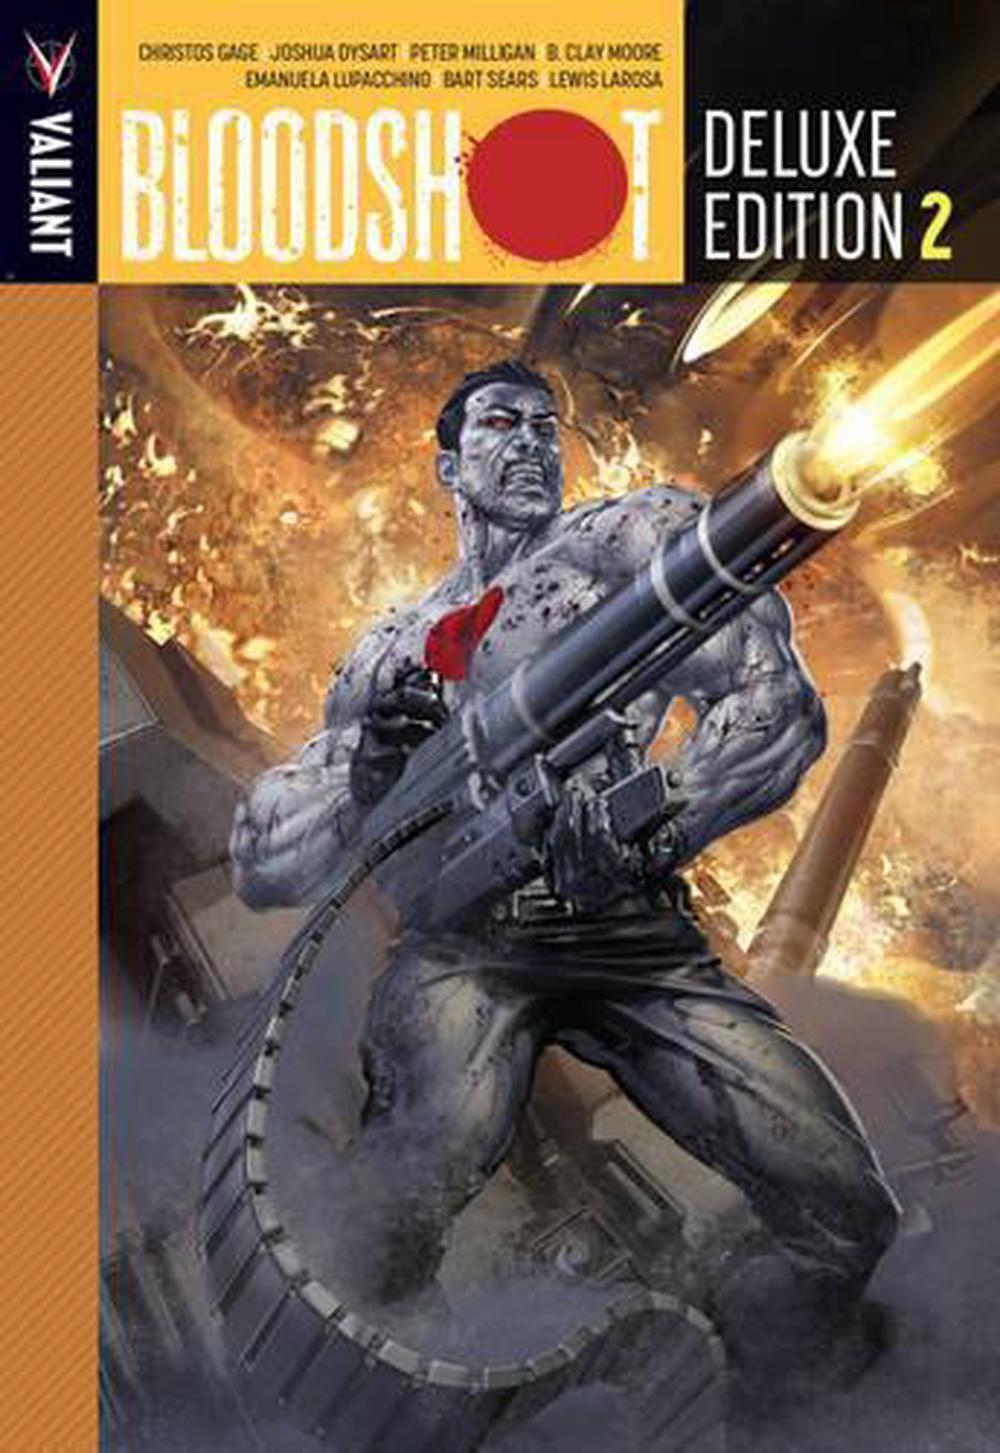 Bloodshot Deluxe Edition Book 2 by Christos Gage (English) Hardcover Book